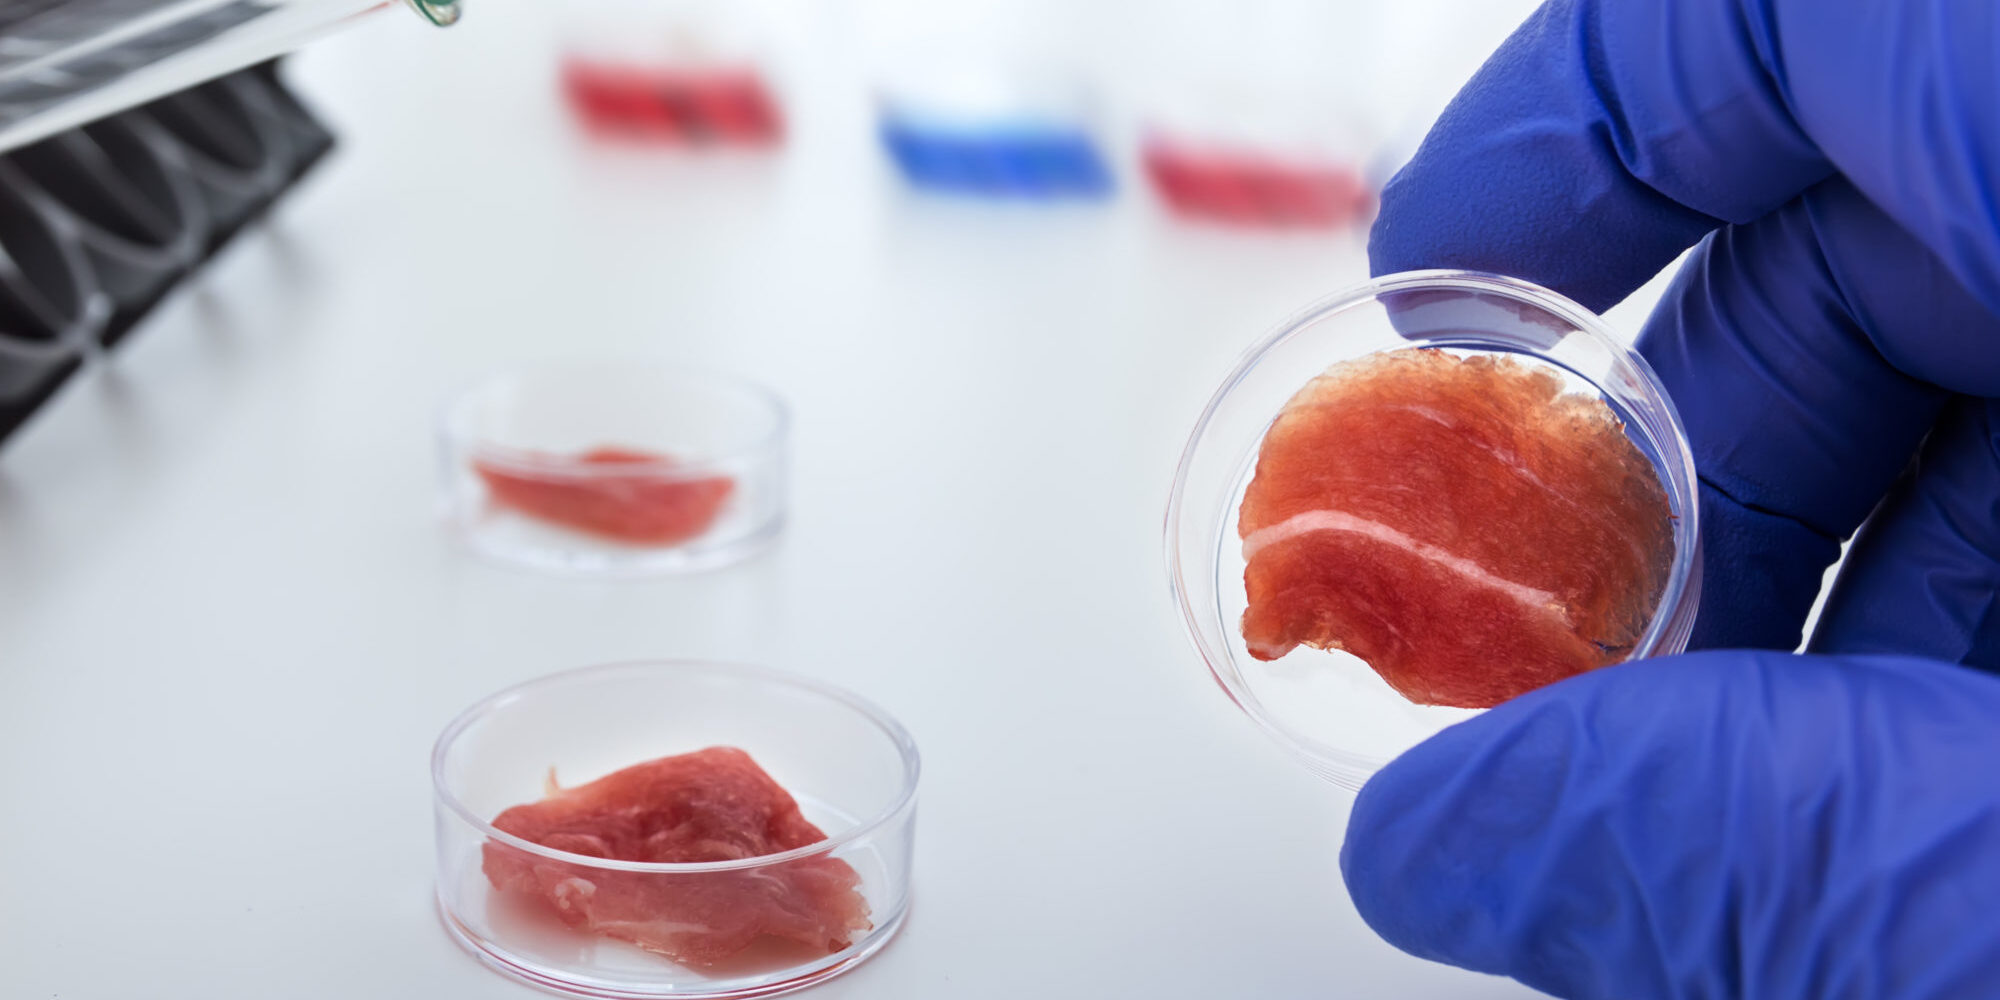 Meat cultured in laboratory conditions from stem cells